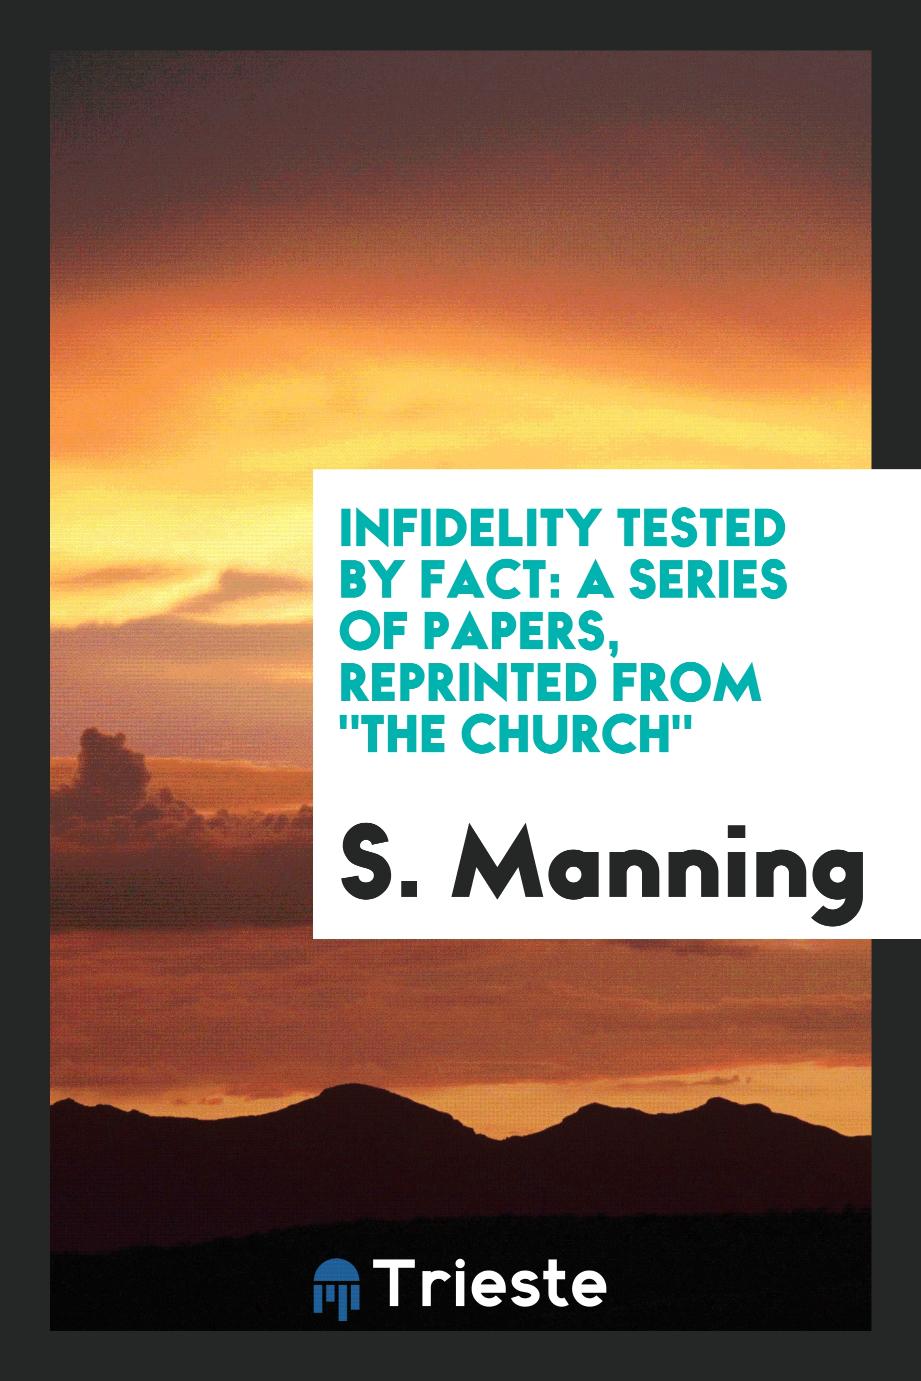 Infidelity tested by fact: a series of papers, reprinted from "The Church"